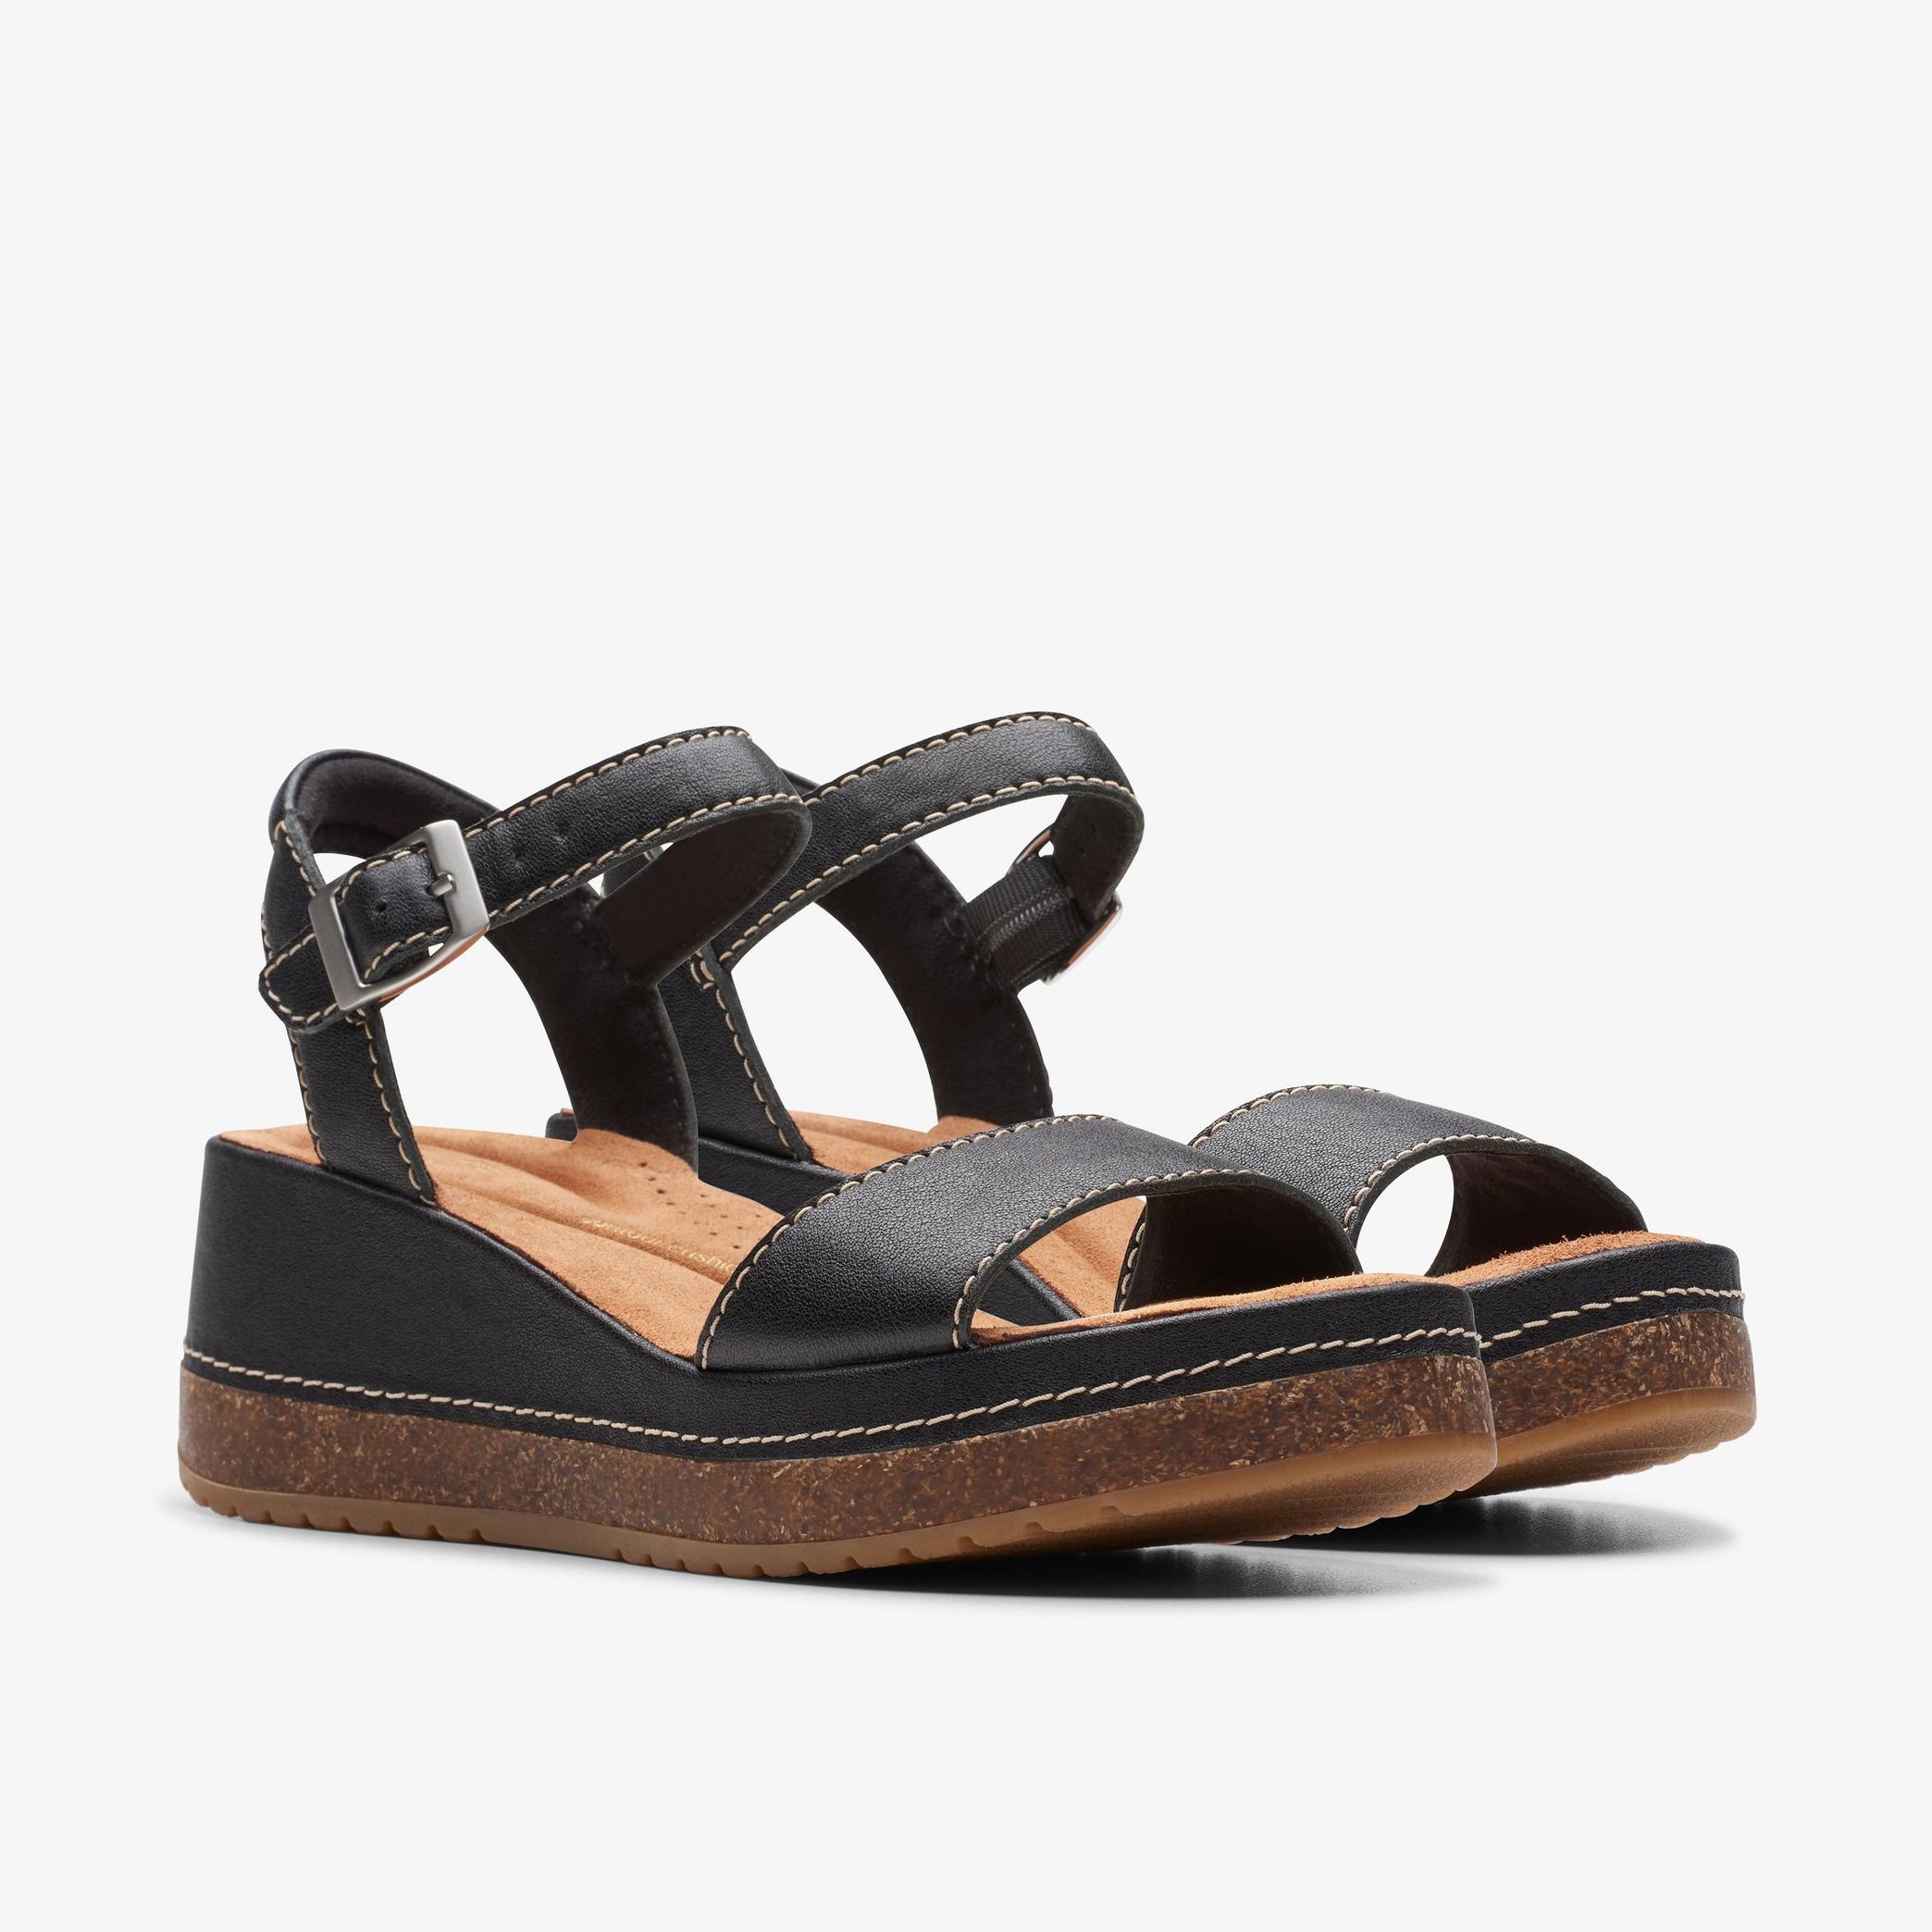 Kassanda Lily Black Leather Wedges, view 4 of 6